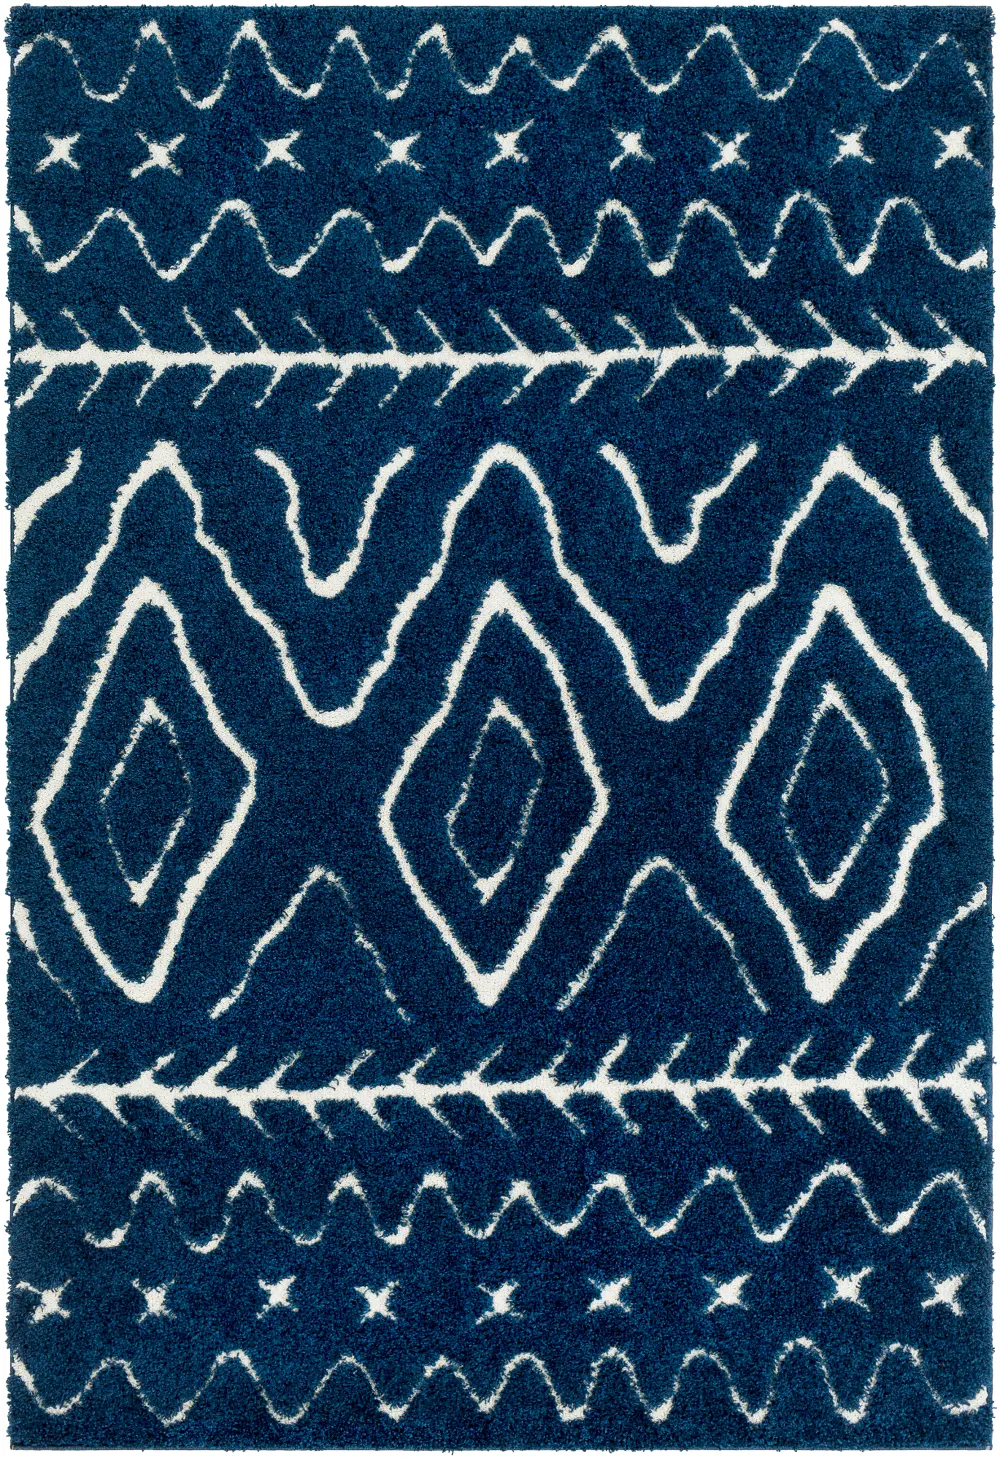 8 x 10 Large Navy Blue and Cream Area Rug - Cut and Loop-1